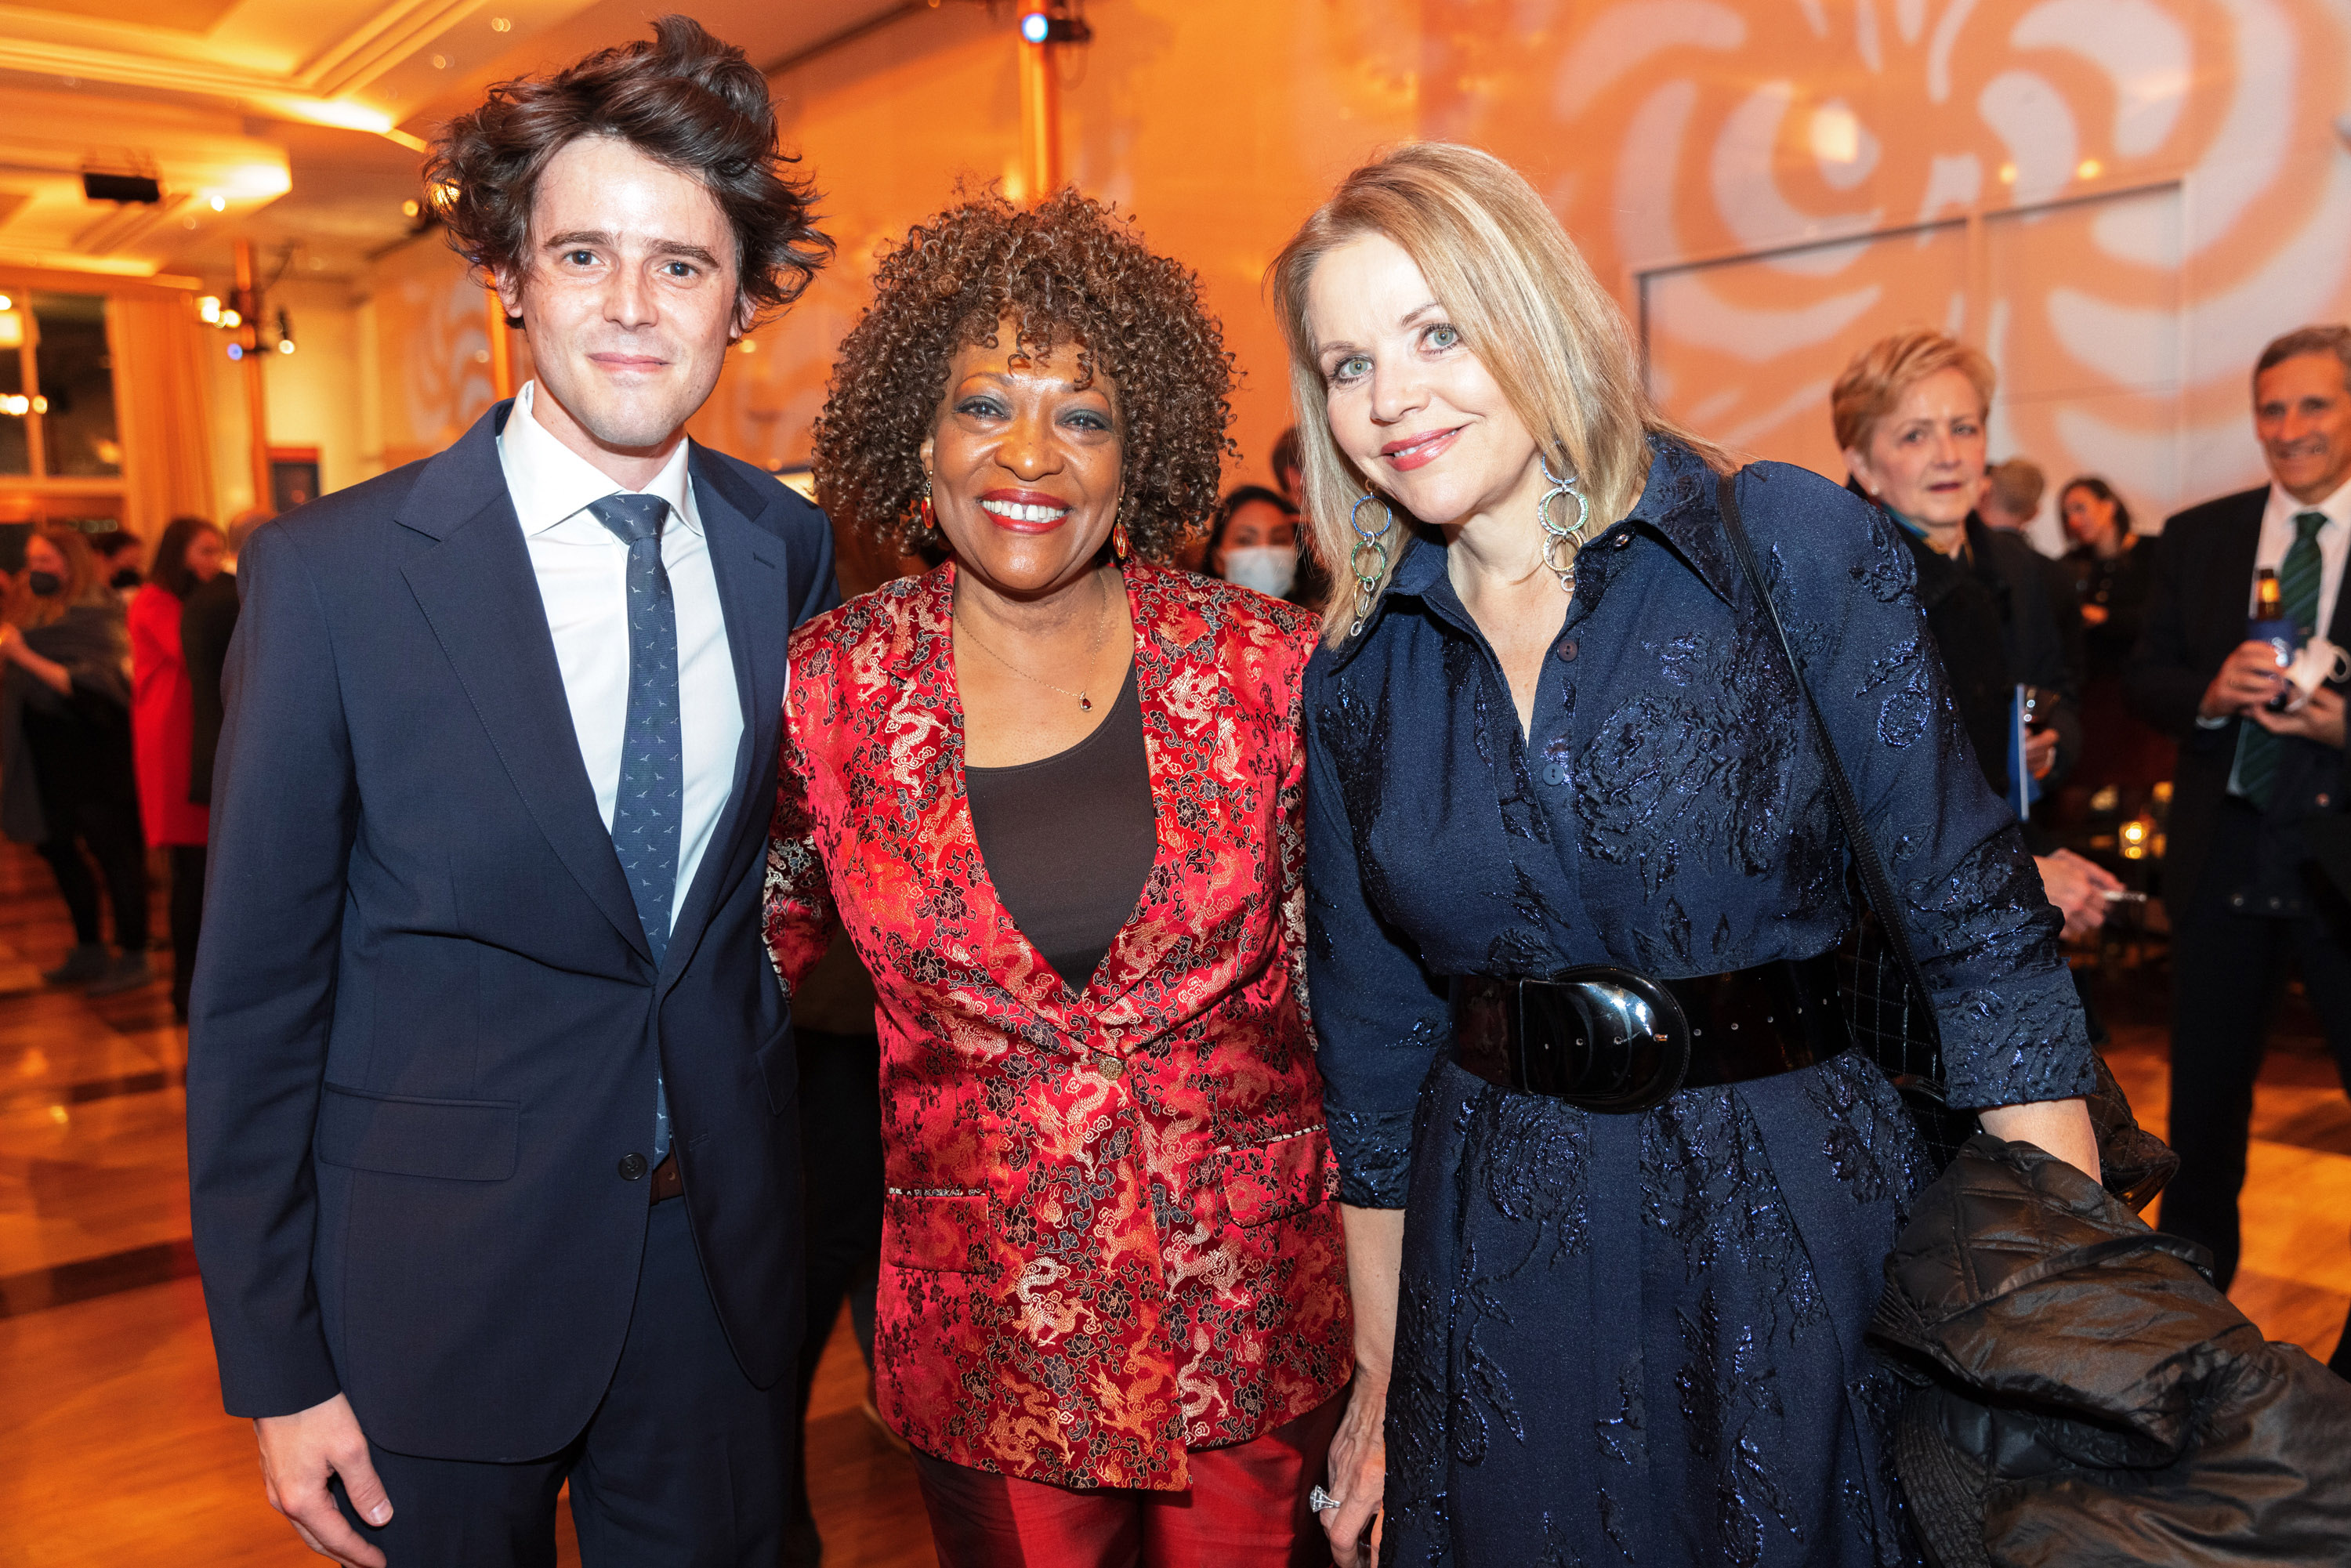 Fulbrighter's Sam Nester, Rita Dove, and Renee Fleming-photo by Katie Dance